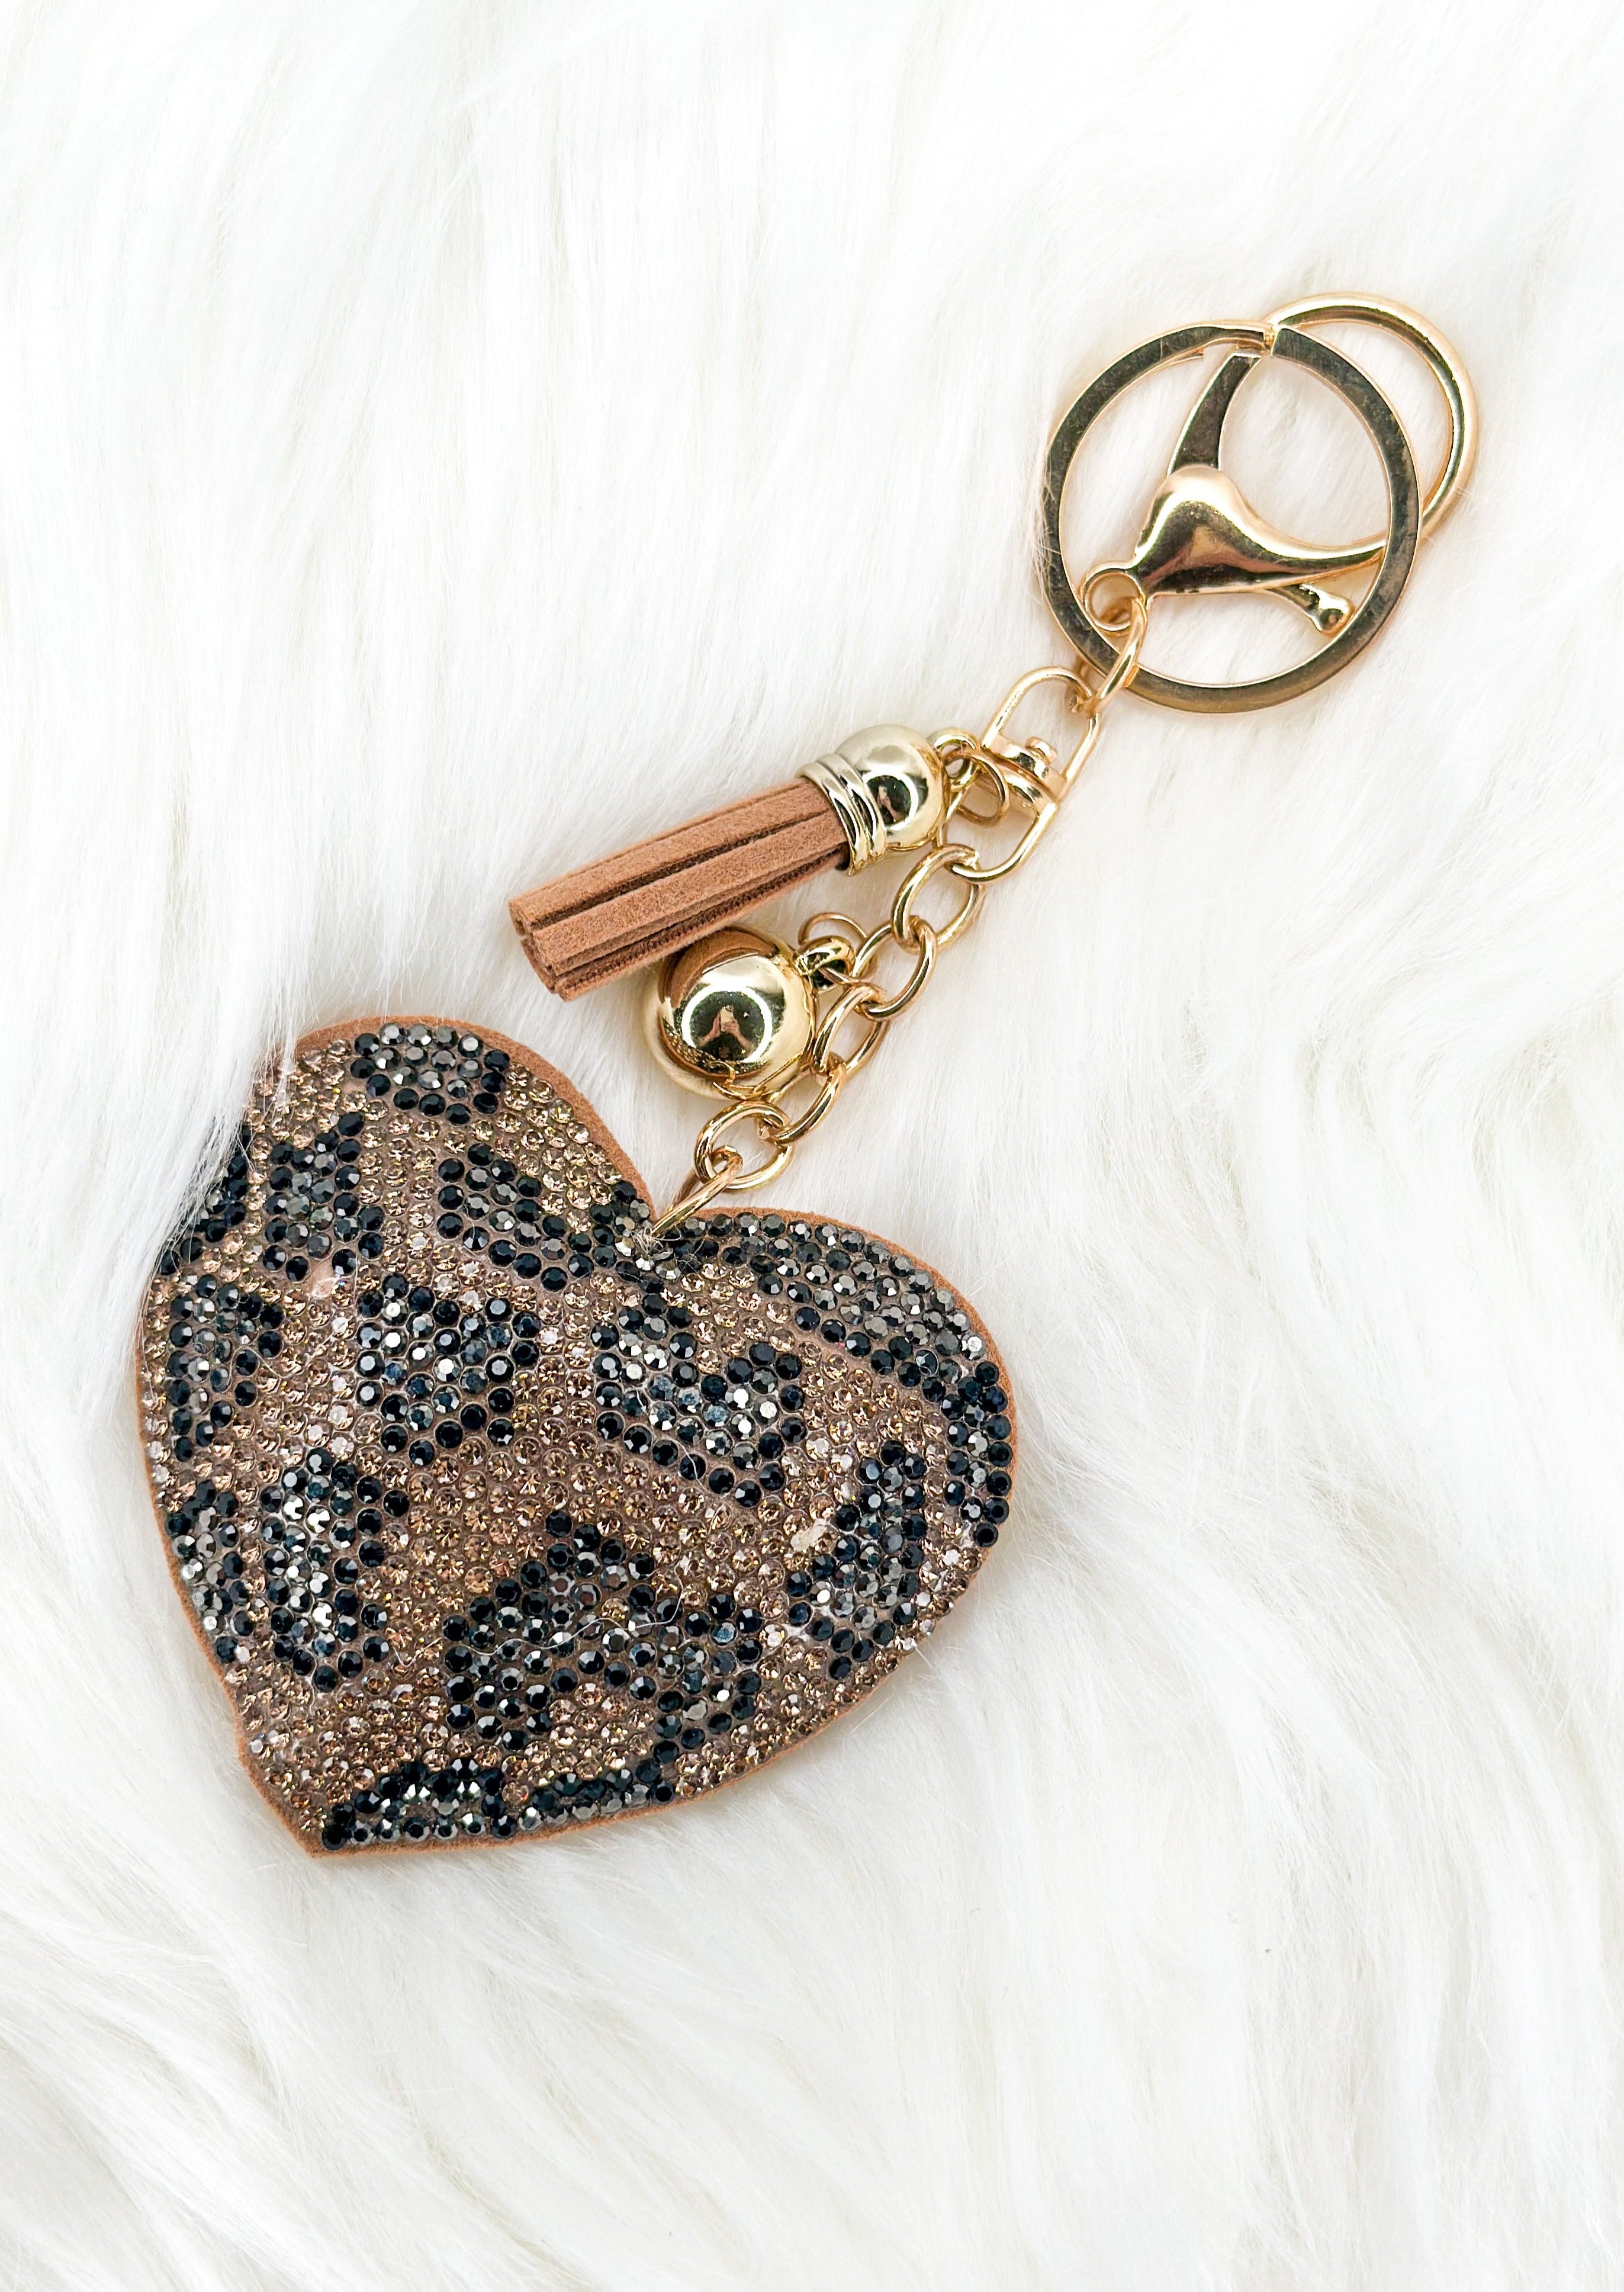 Leopard heart sparkly keychain with gold tassel and hardware.